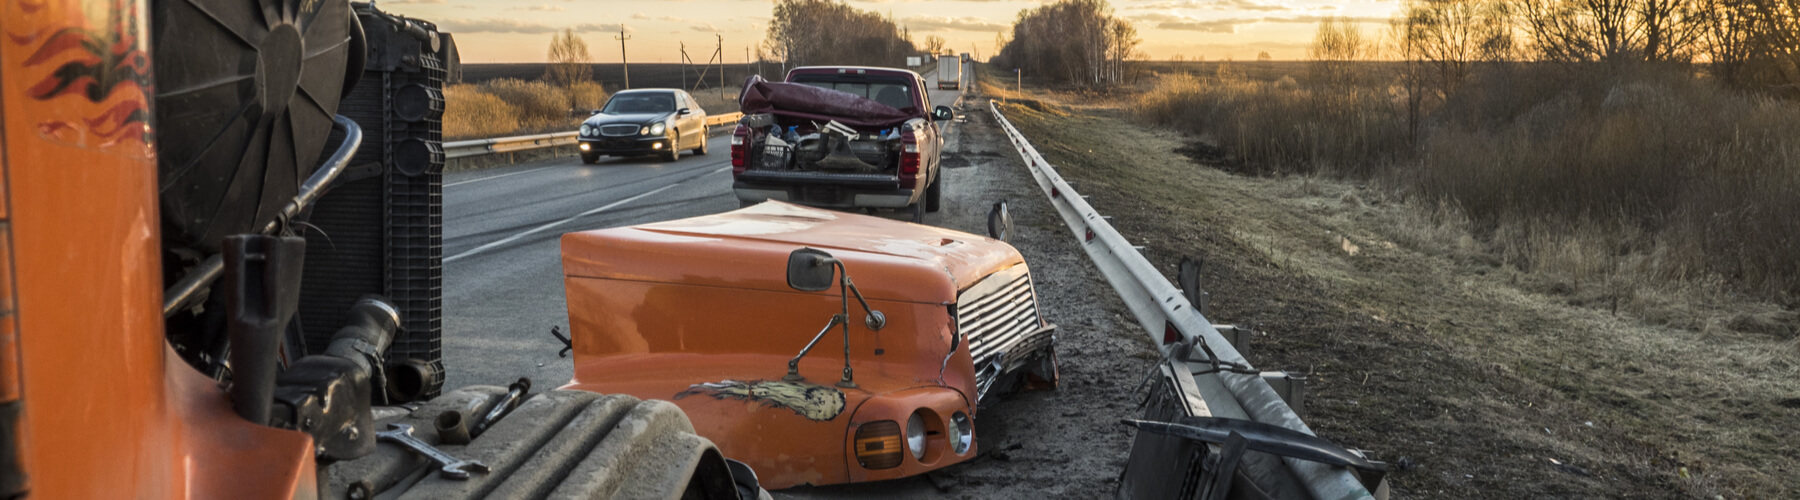 Trucking accident, semi truck crash, rear ended small pickup truck, closeup image of the damage done to the front of a semi truck and rear of a pickup truck due to an accident